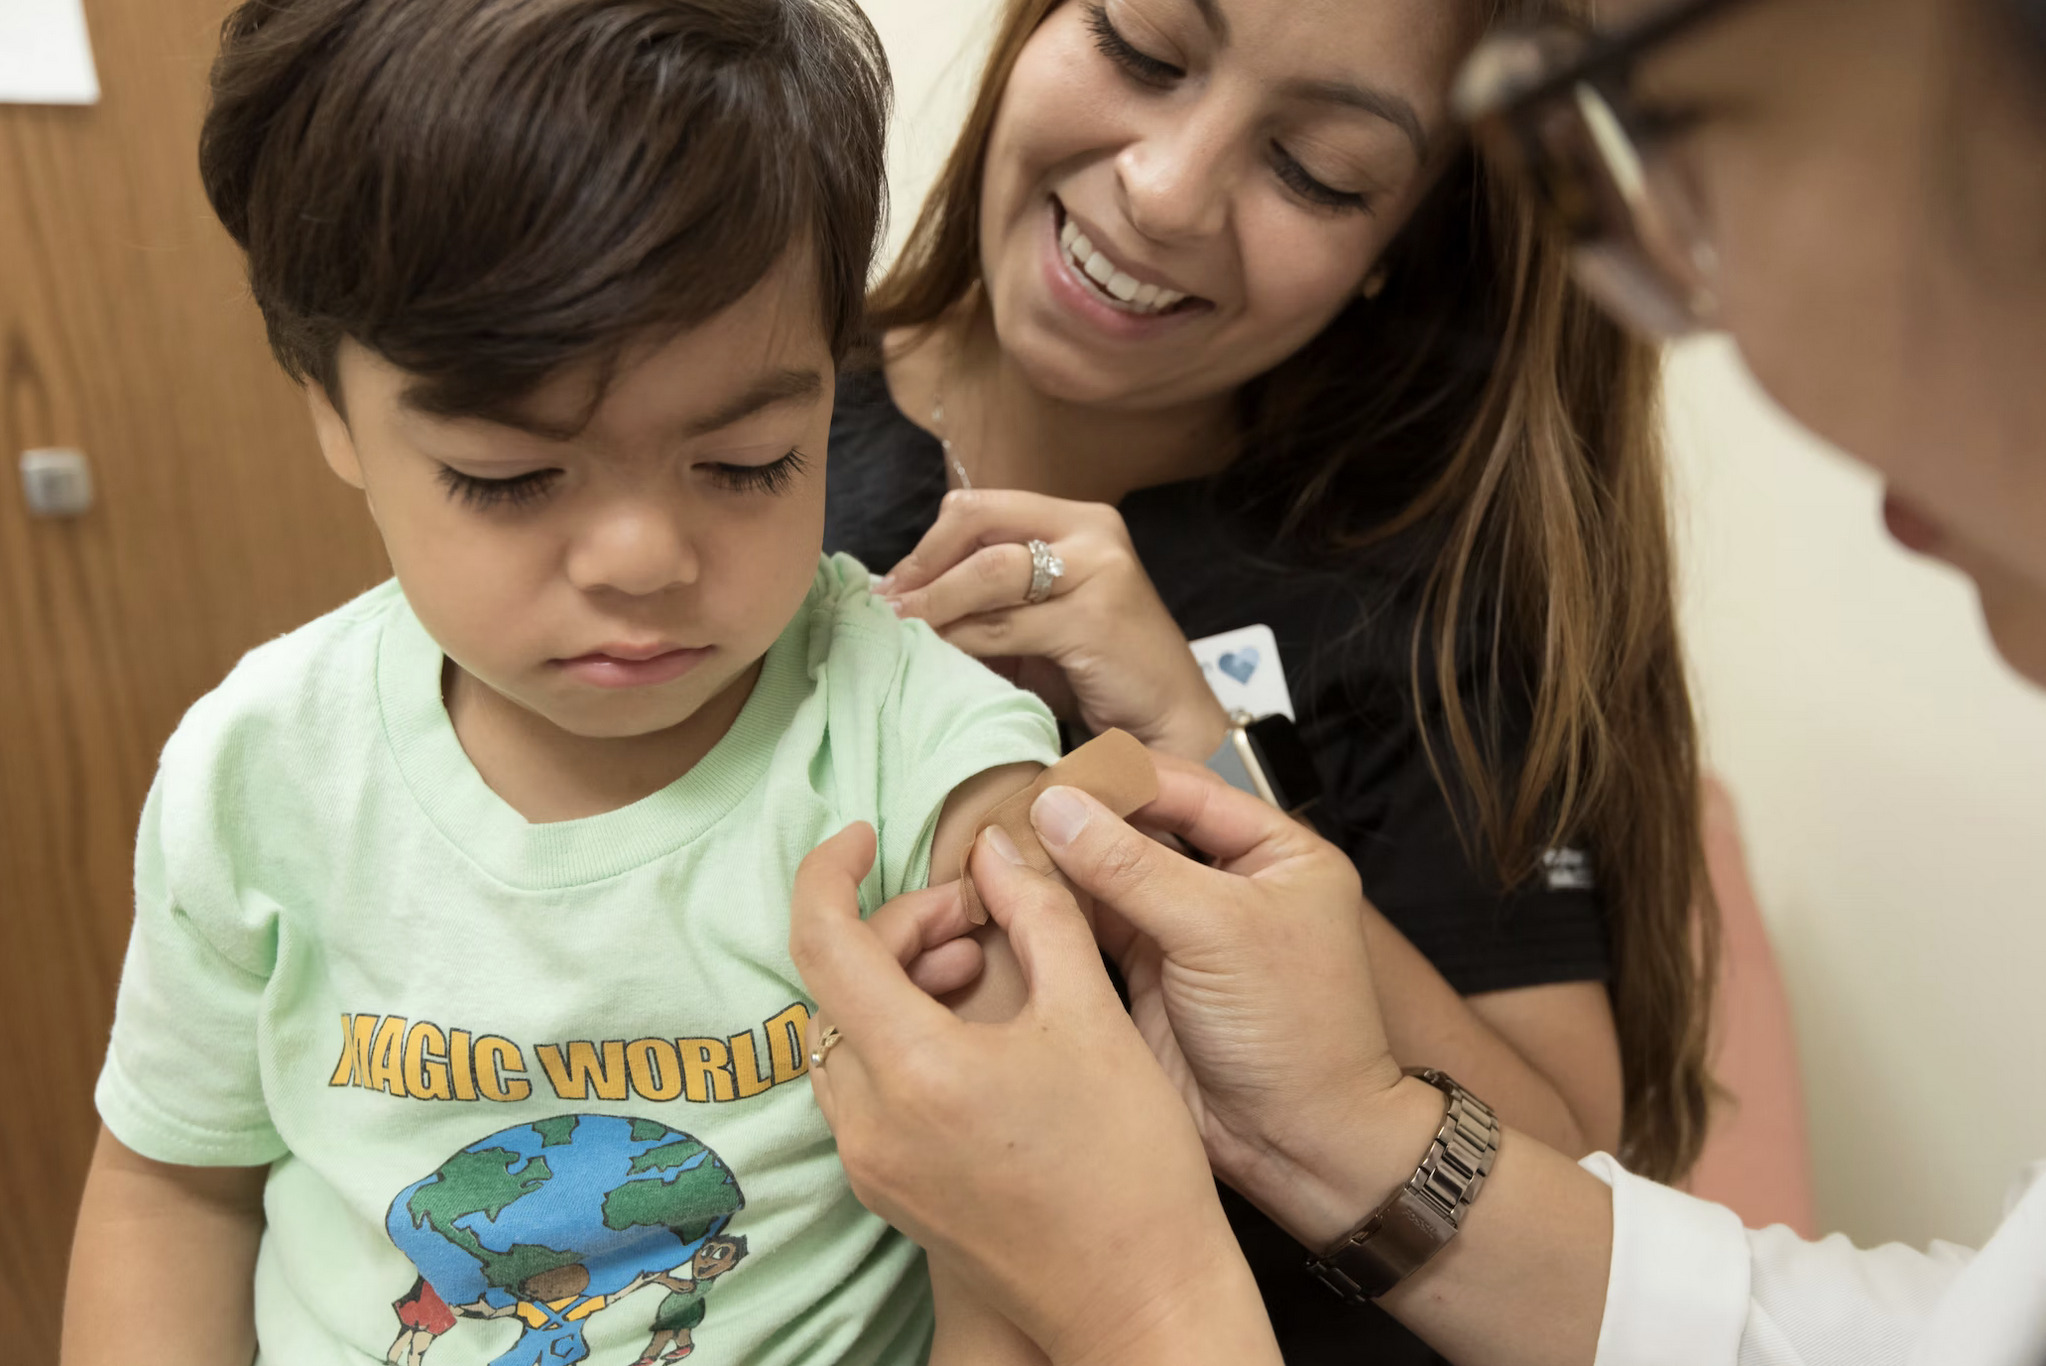 Picture of a young boy who just received a vaccination. He is sitting on his mother's lap and is receiving a band-aid from a healthcare professional.